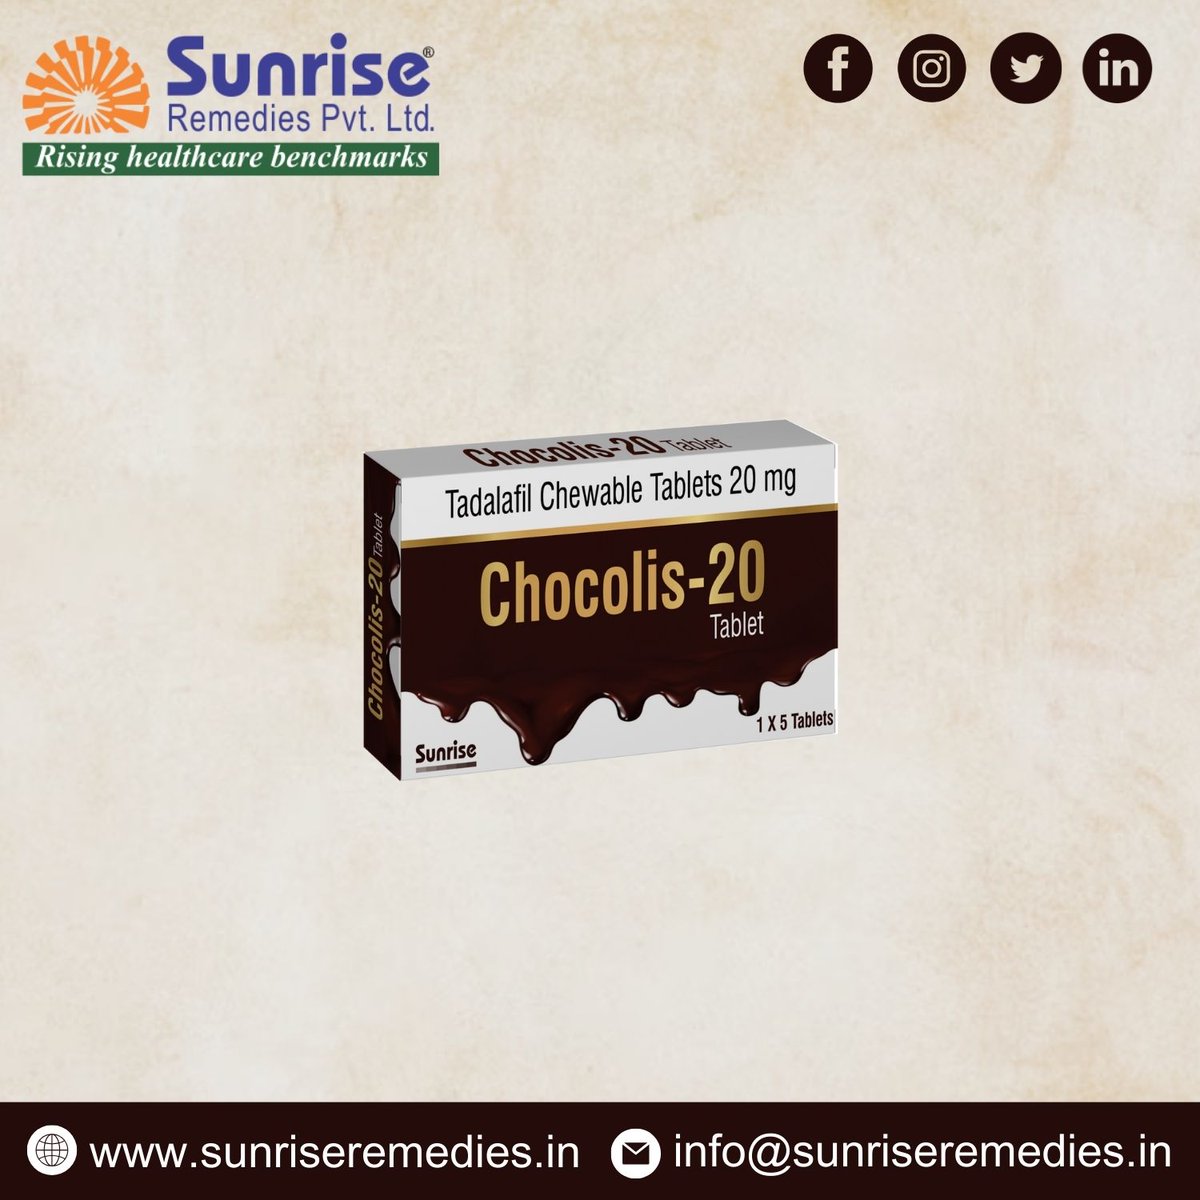 #ChocolisChewable Generic Tadalafil Chewable Most Popular Products From Sunrise Remedies Pvt. Ltd.

Read More: sunriseremedies.in/our-products/c…

#Chocolis #TadalafilChewable #SildenafilChewable #DapoxetineHCL #Vardenafil #Avanafil #Udenafil #SildenafilUSP #TadalafilHCL #EDpills #PEpills